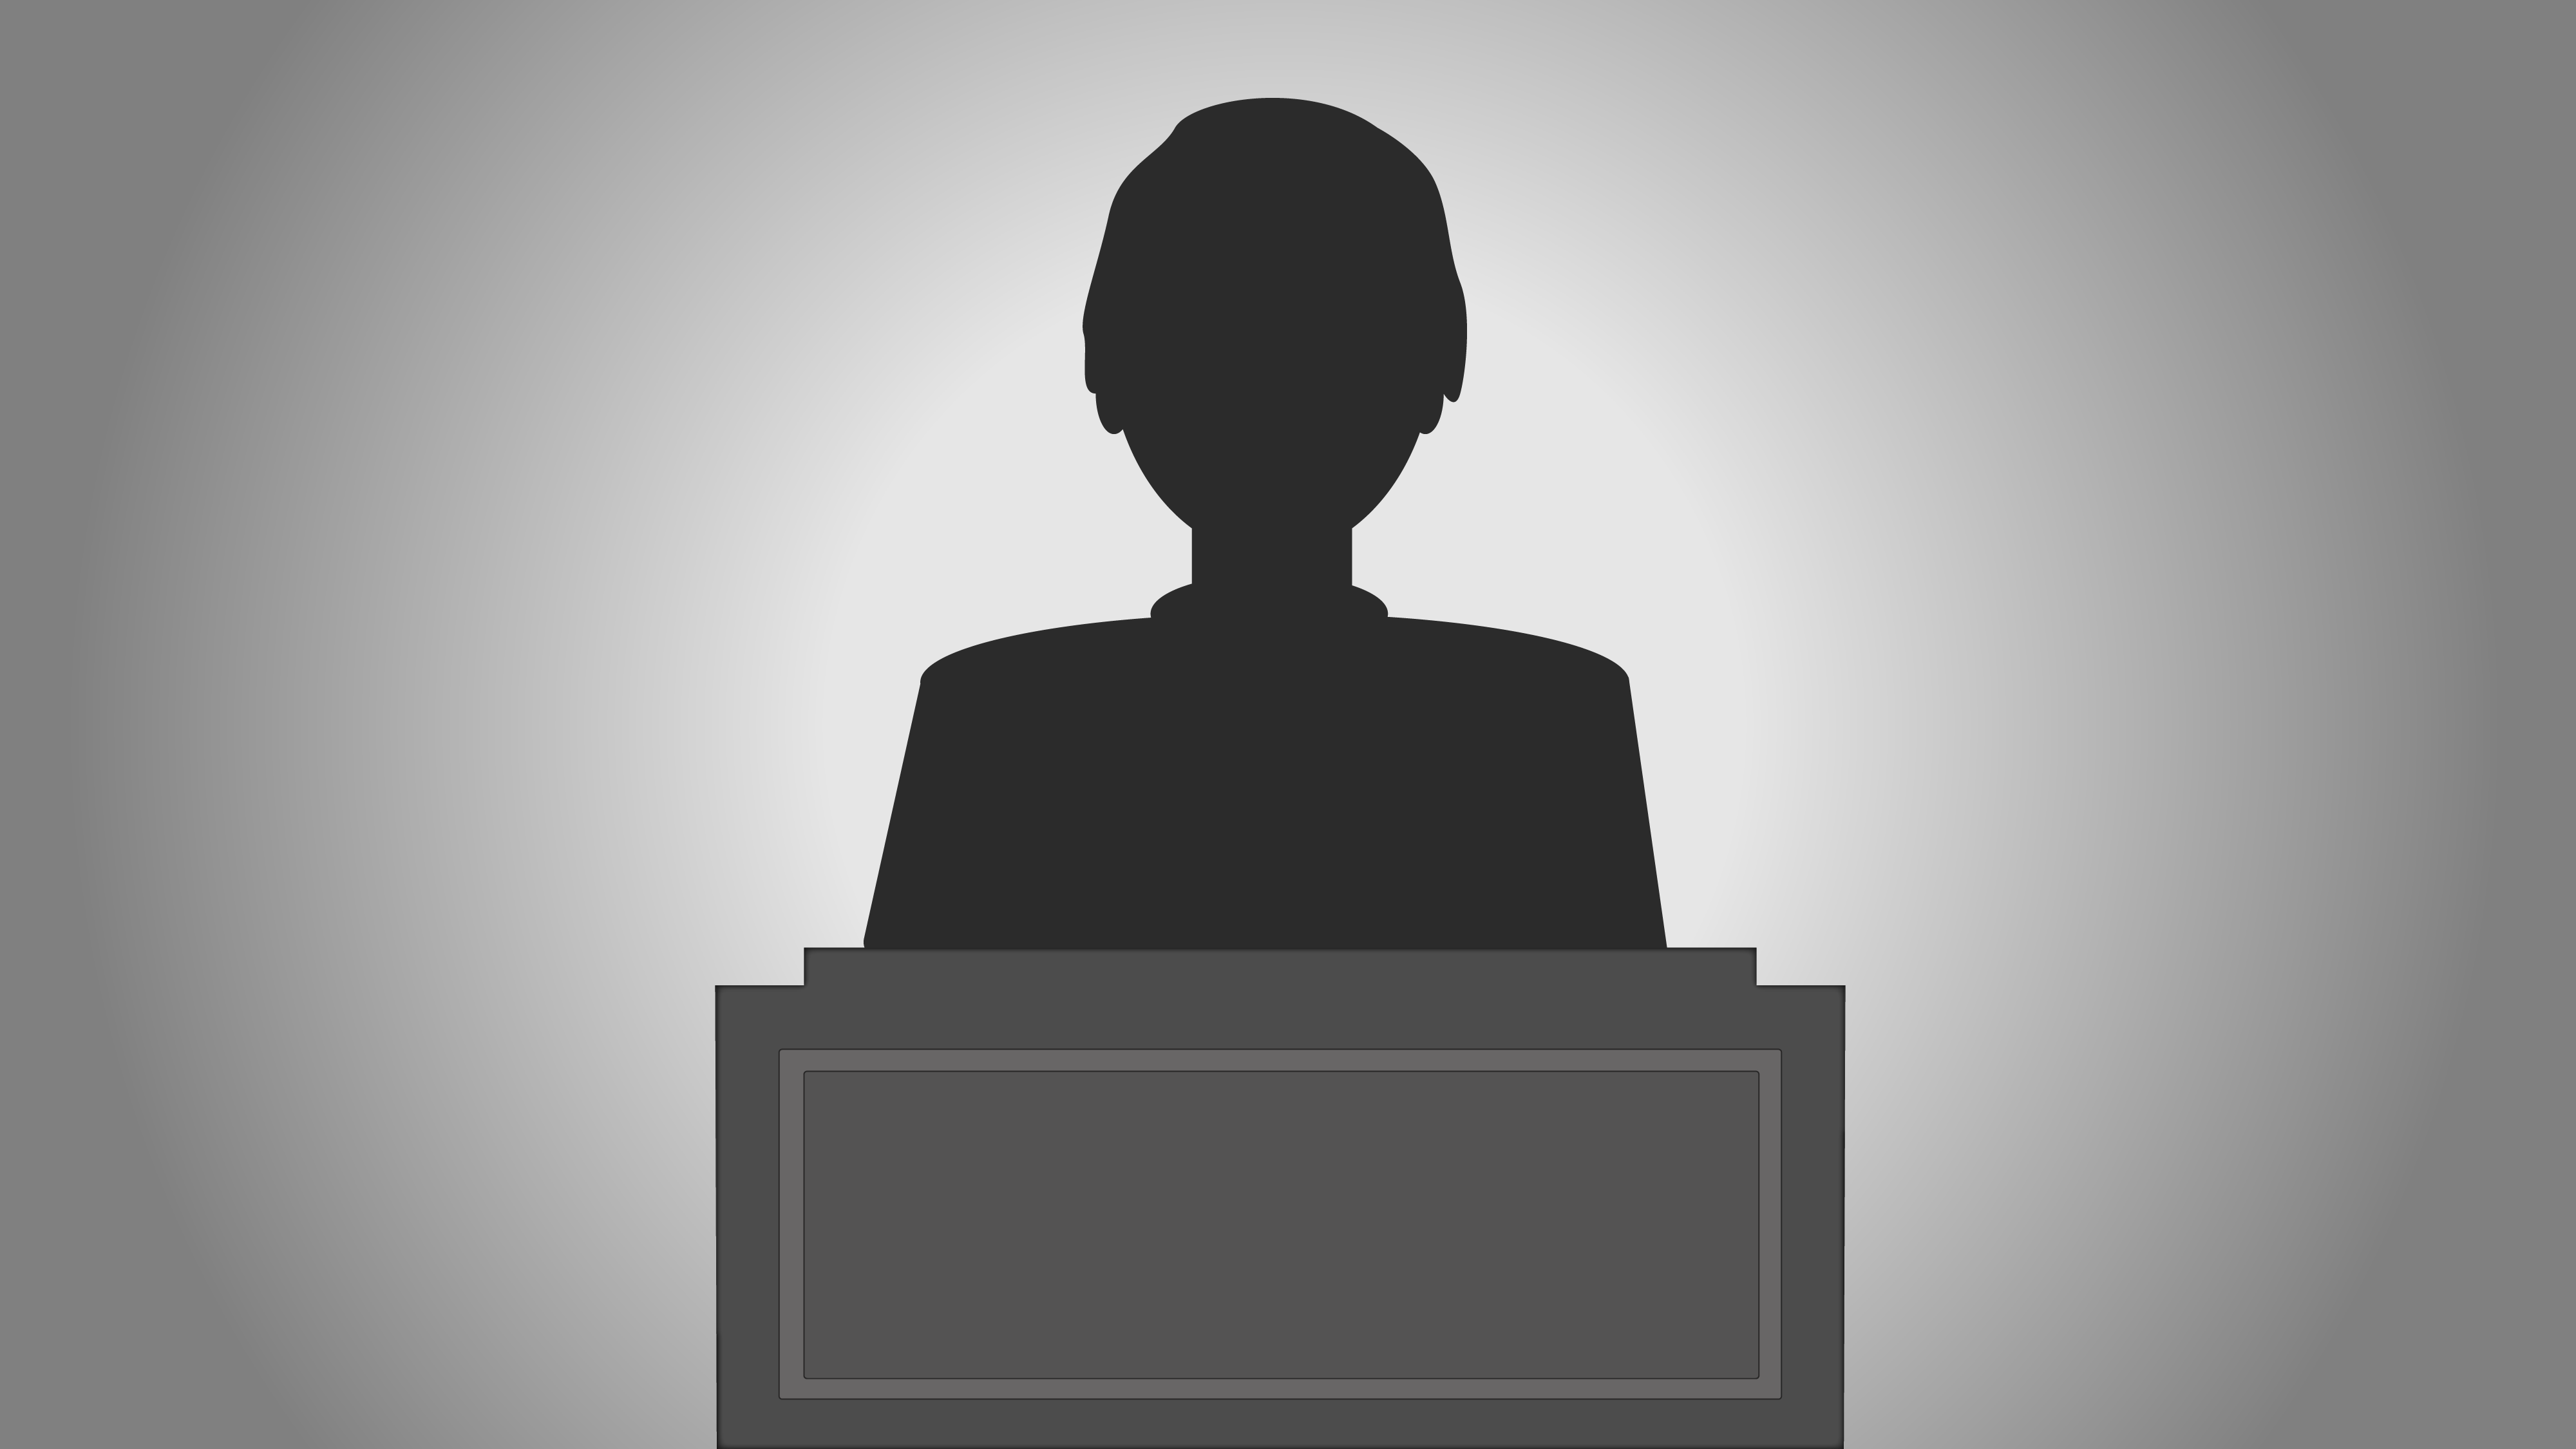 CROSS-EXAMINATION OF WITNESSES - ppt download